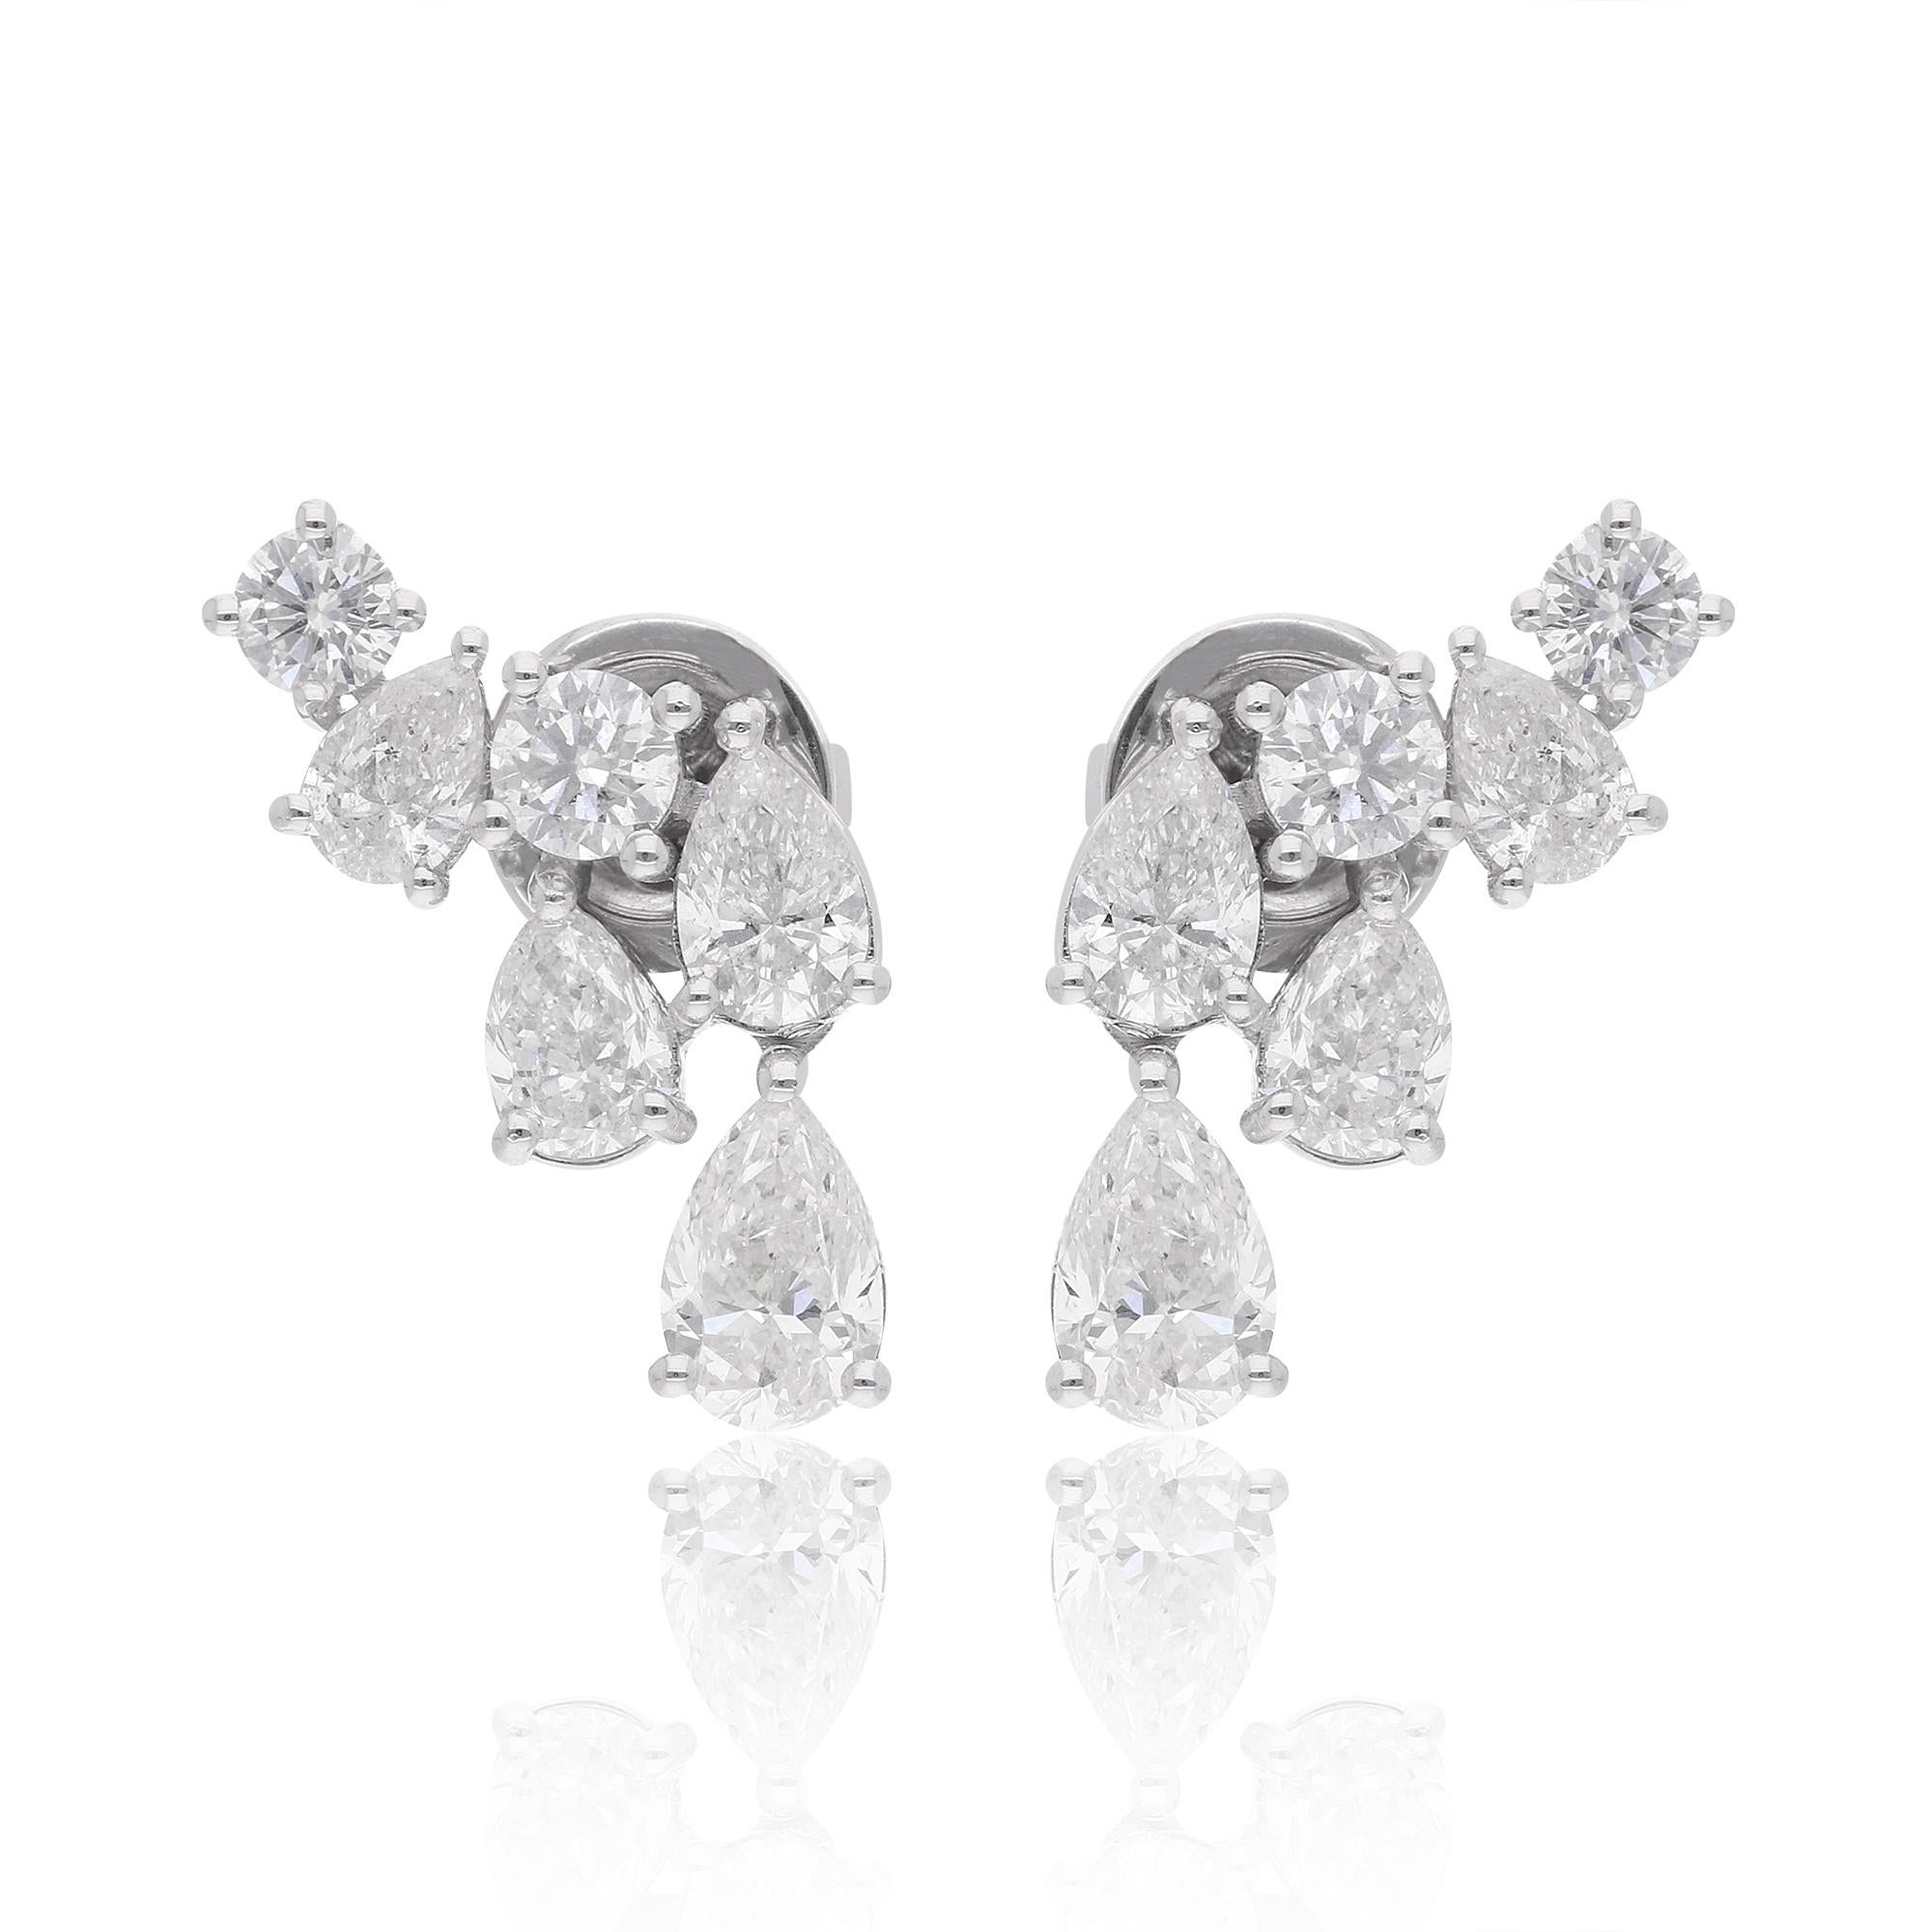 Item Code :- SEE-14345A
Gross Wt. :- 2.60 gm
18k White Gold Wt. :- 2.49 gm
Natural Diamond Wt. :- 0.56 Ct. ( AVERAGE DIAMOND CLARITY SI1-SI2 & COLOR H-I )
Earrings Size :- 11 mm approx.

✦ Sizing
.....................
We can adjust most items to fit